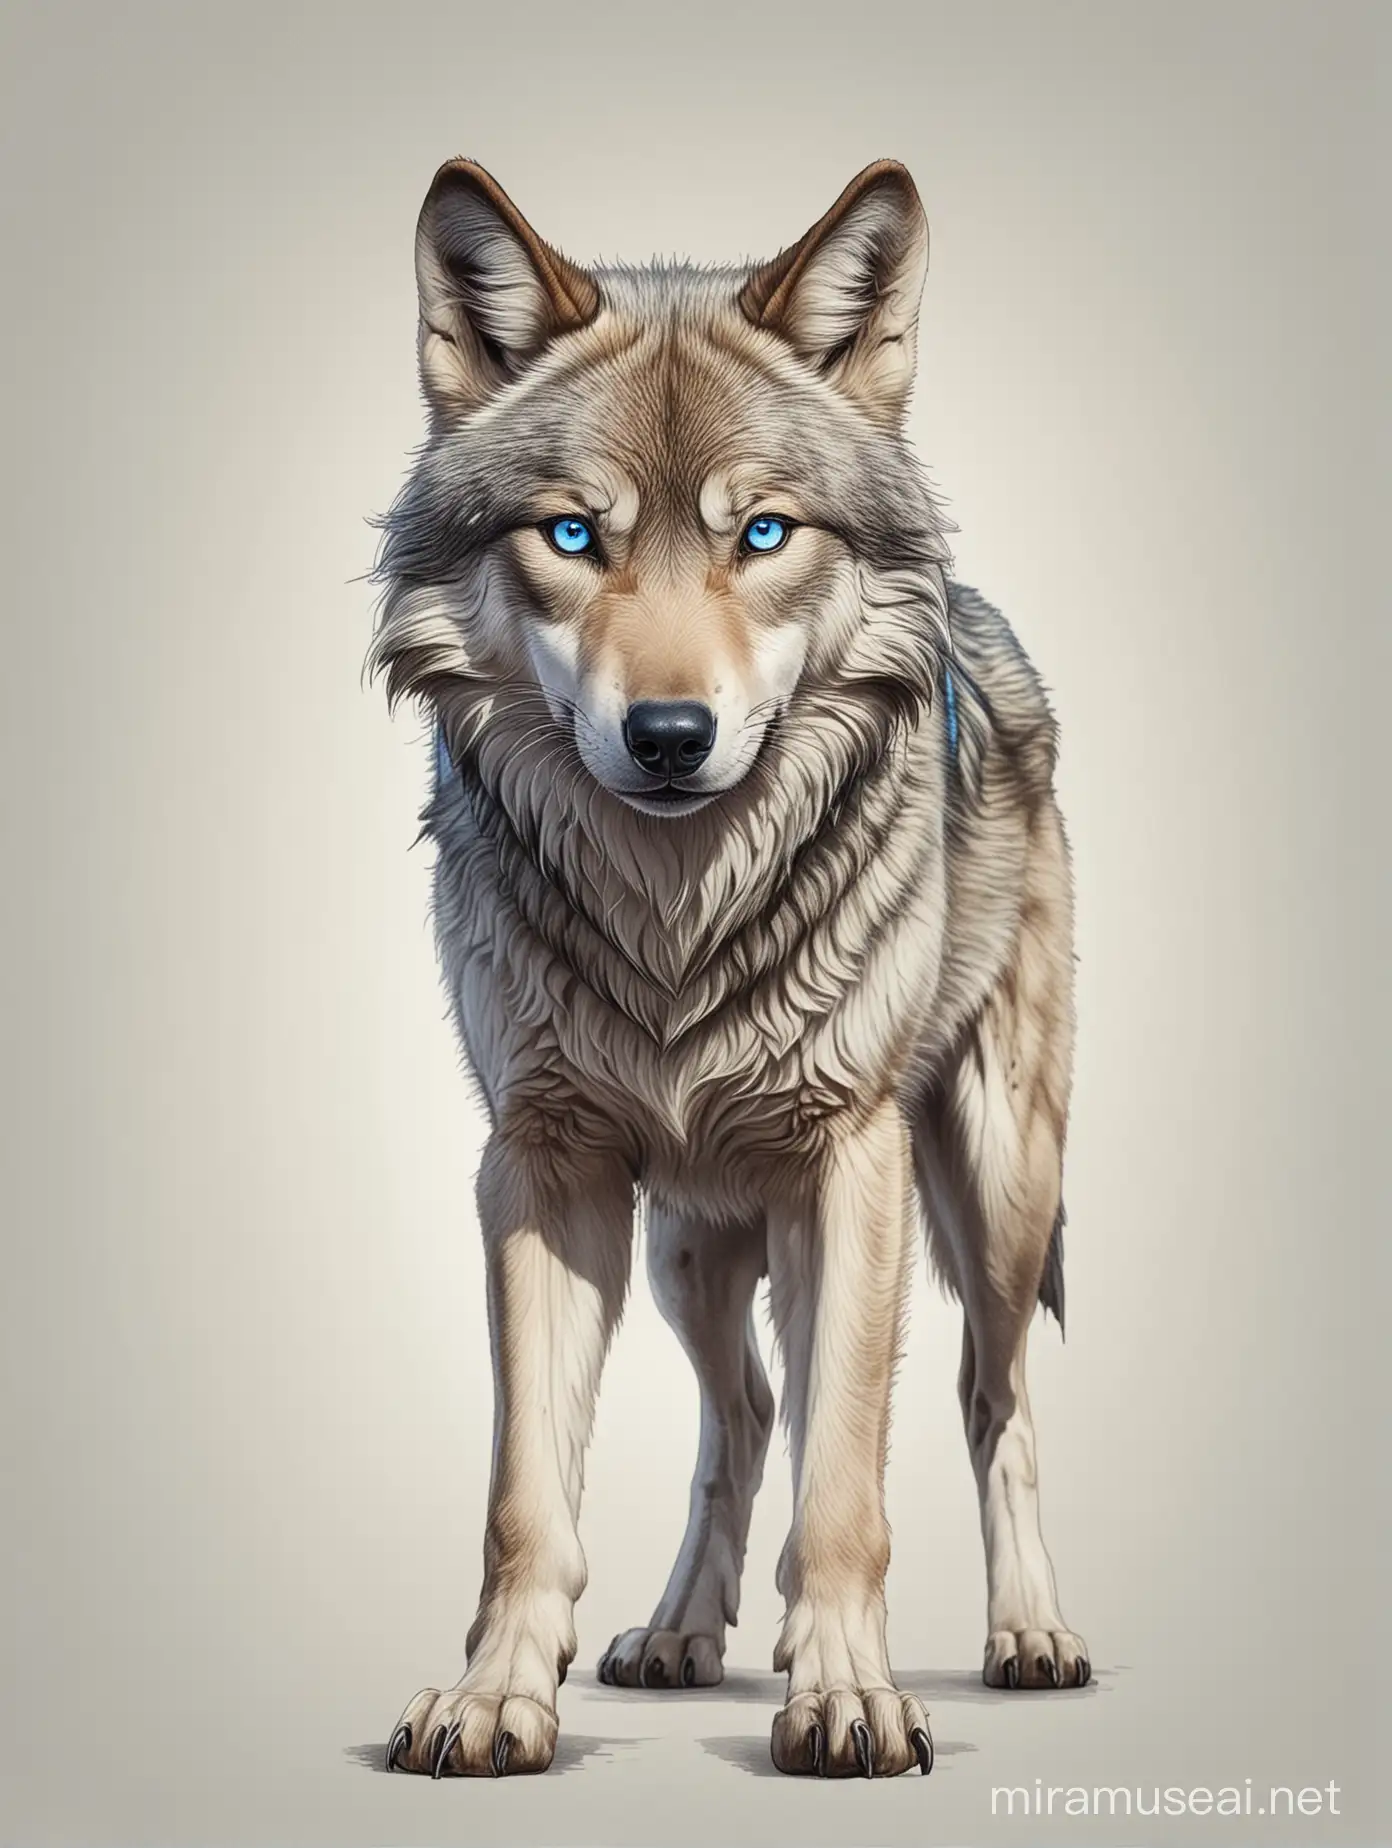 wolf full body with blue eyes, the style is old drawing, background is white